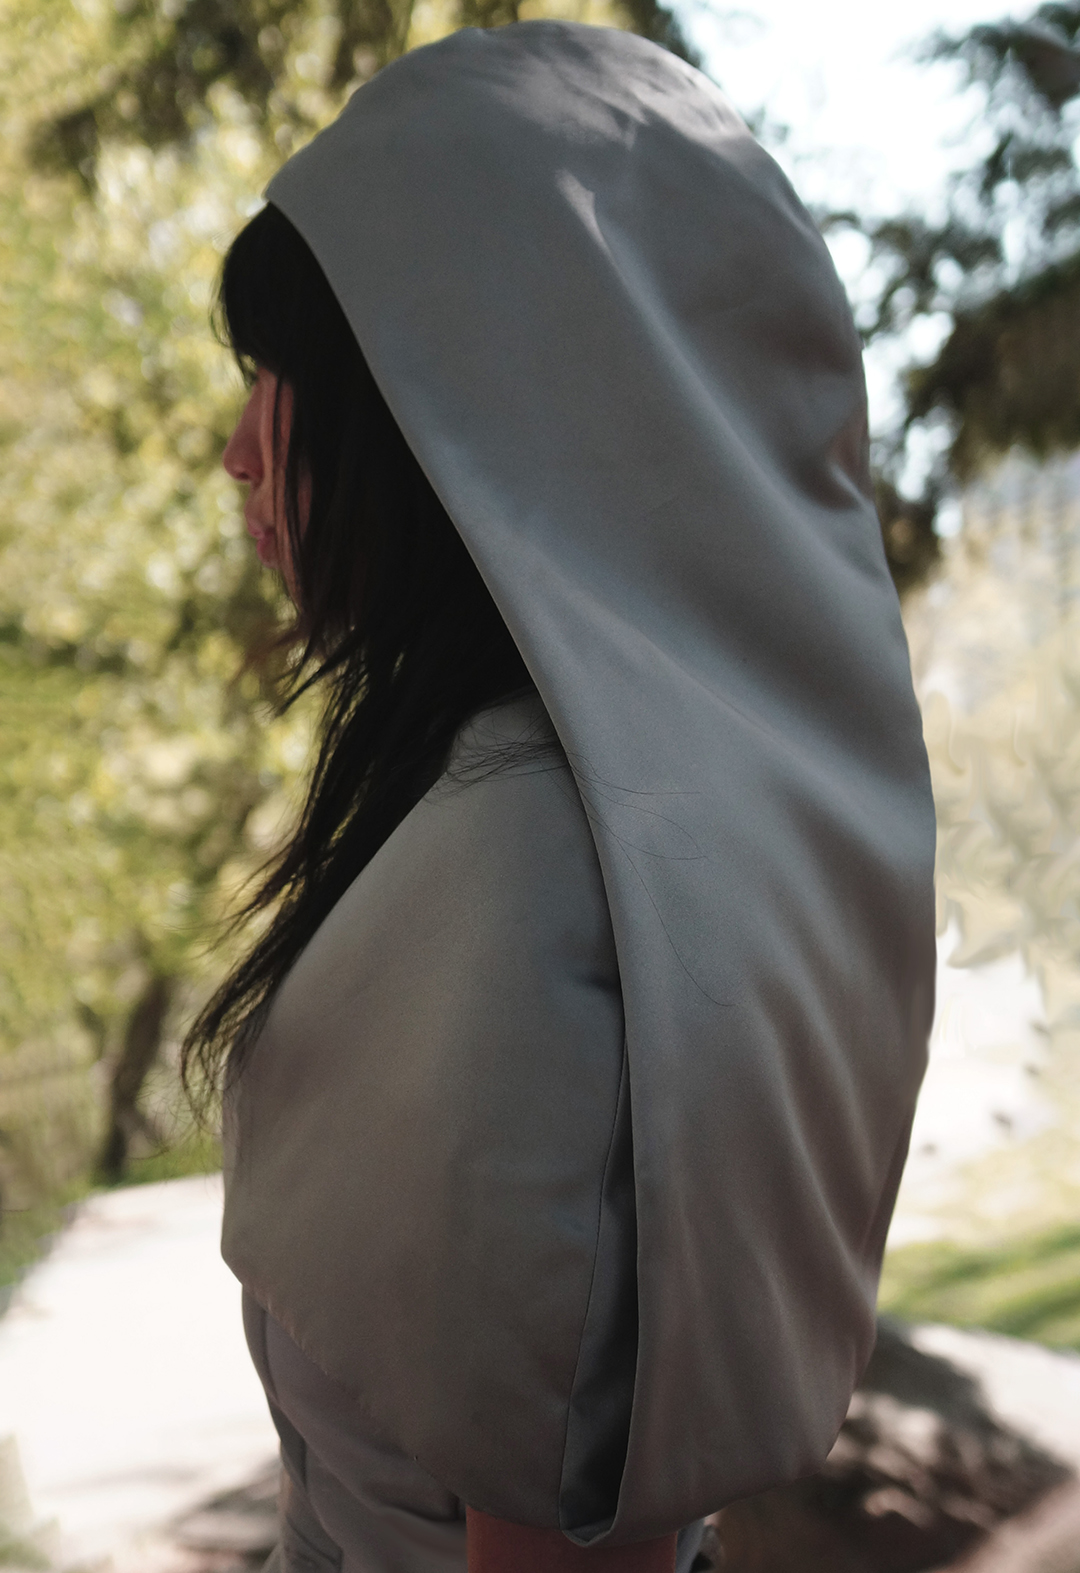 This is a close-up side view of a model wearing a curved gray hood.